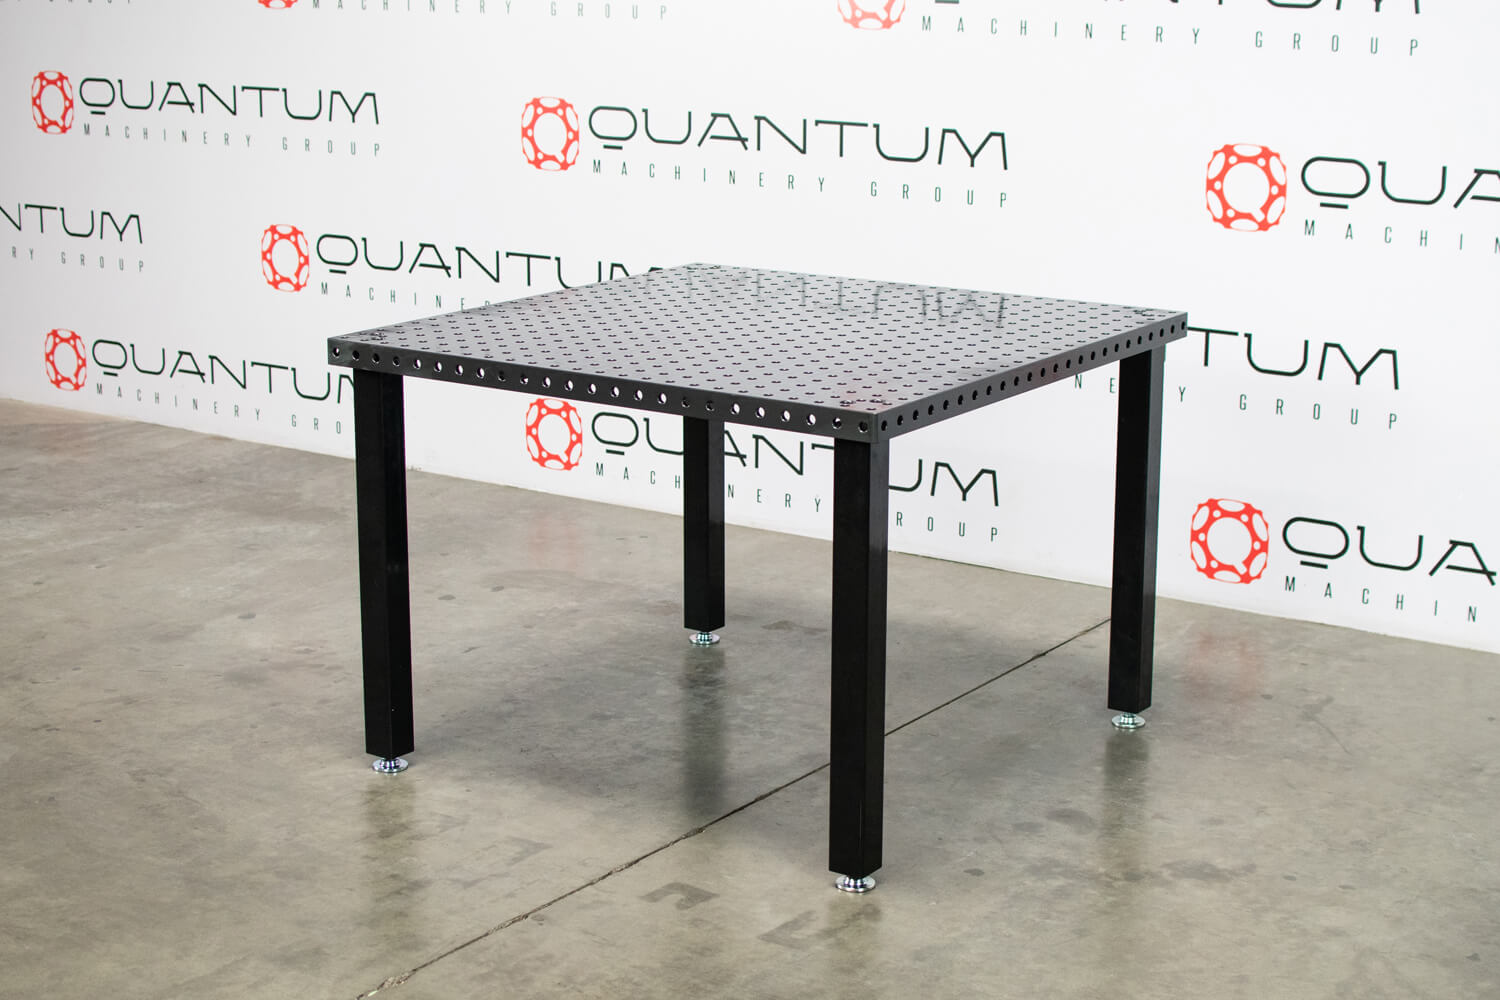 System 16 1200x1200mm (47"x47") Siegmund "BASIC" Welding Table (Item No. 4-161015.P) - Siegmund Welding Tables and Fixtures USA - A Division of Quantum Machinery Group